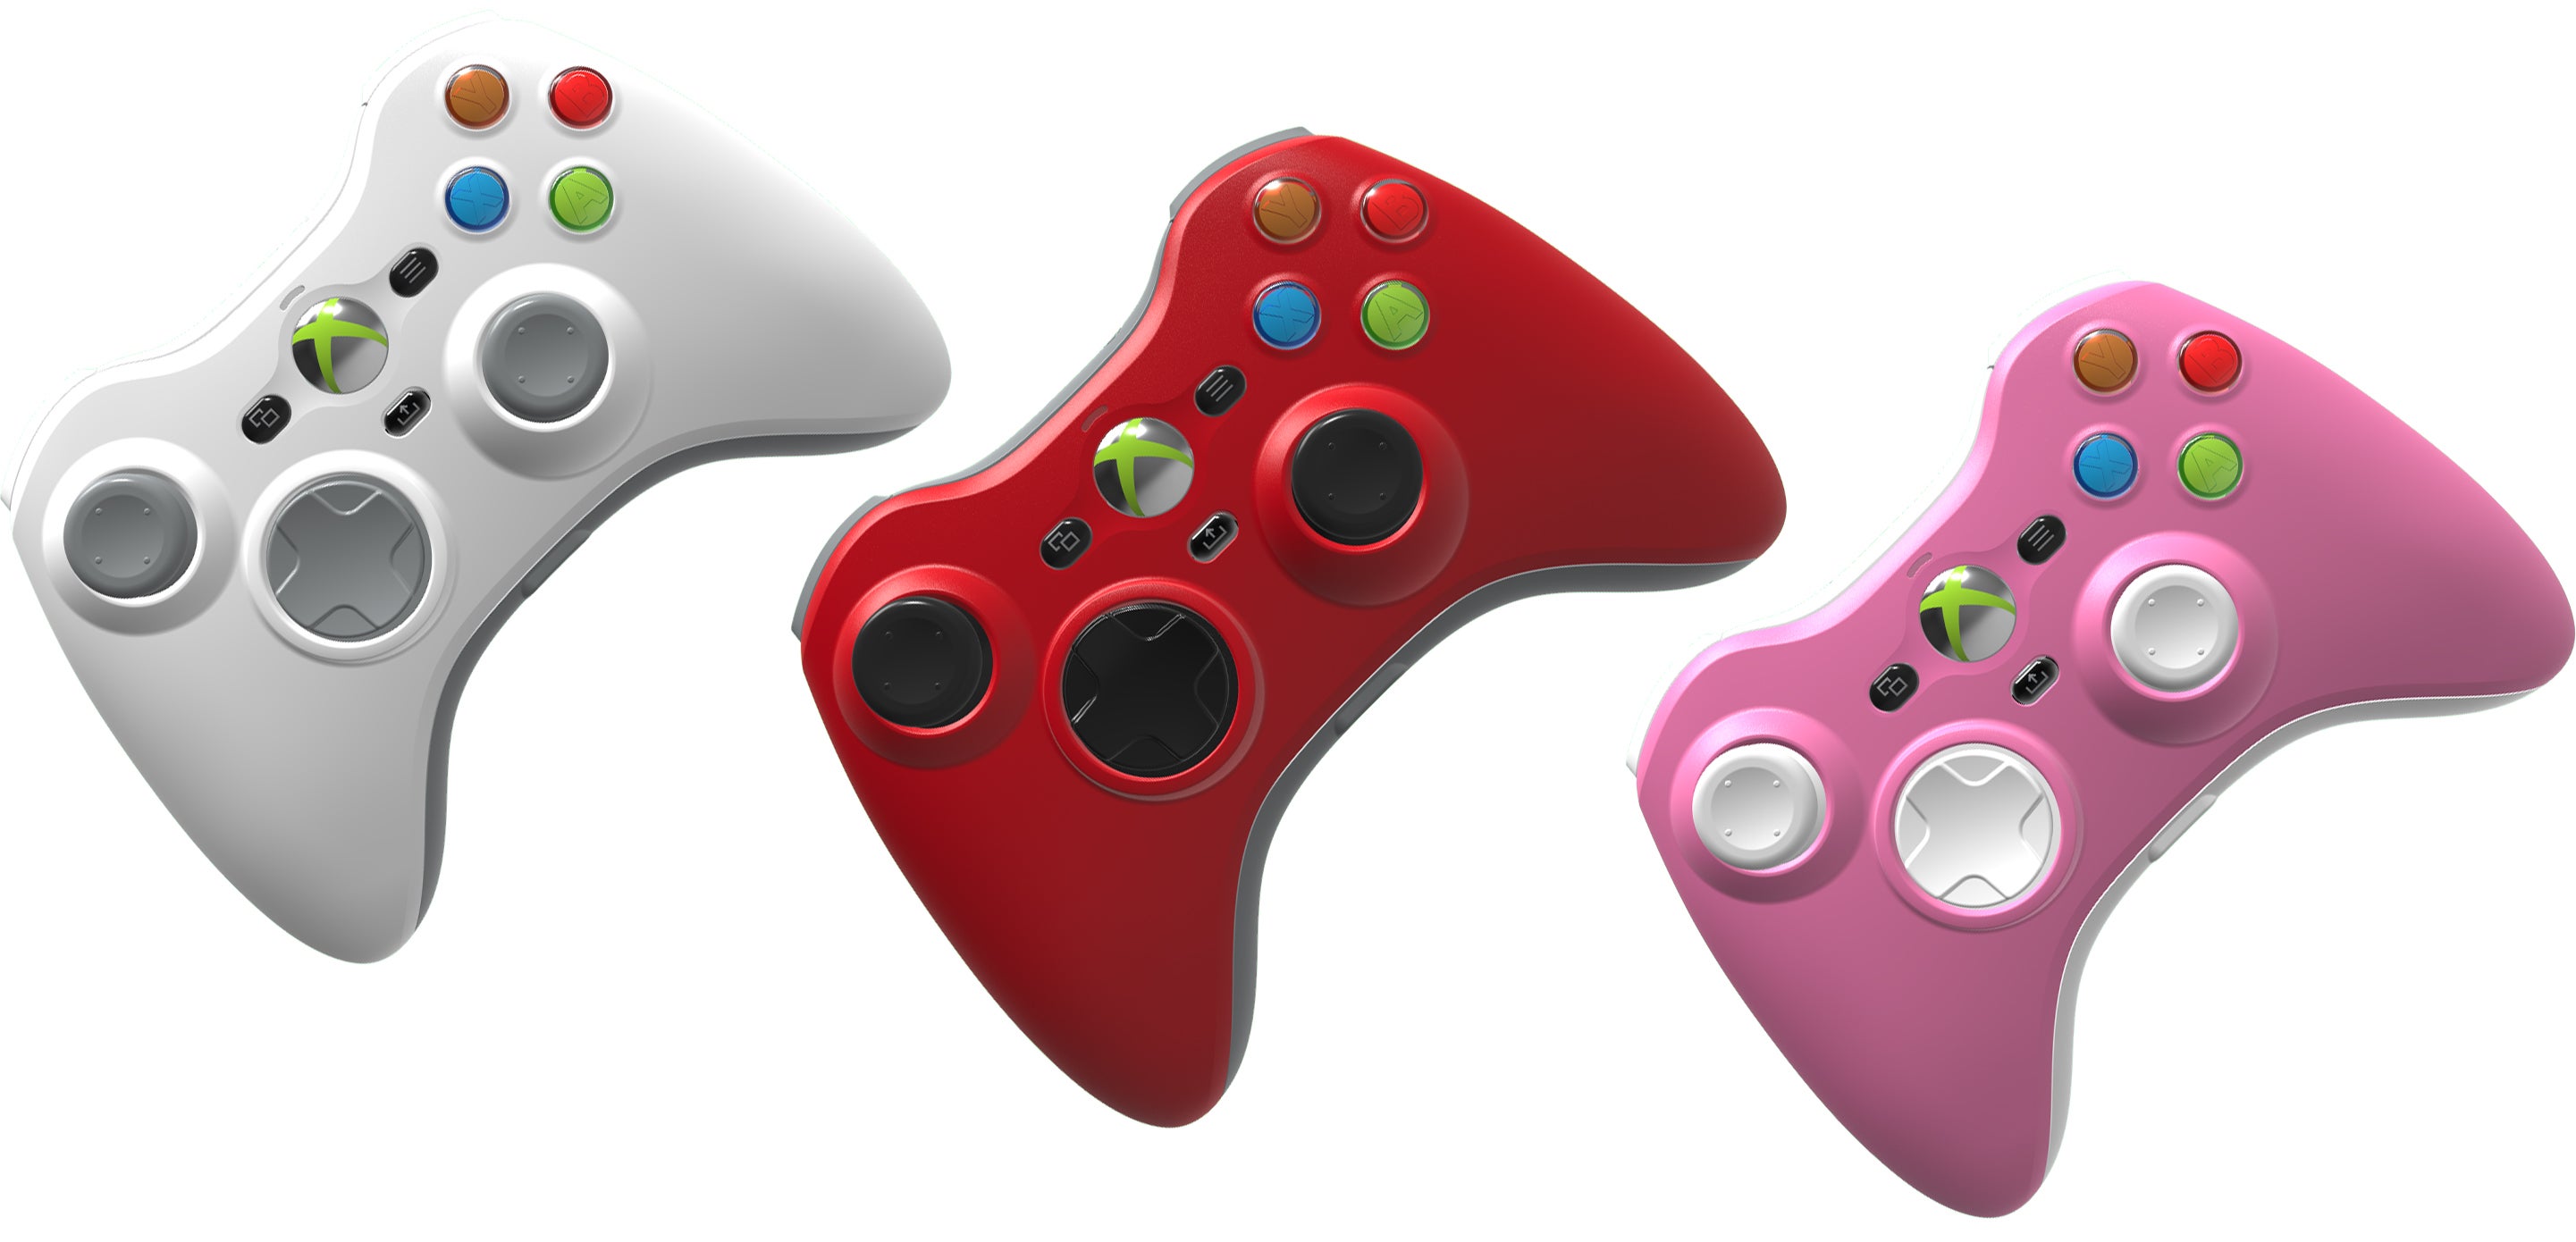 The Xbox 360 Controller is Back, and Now it Natively Works With Modern Consoles